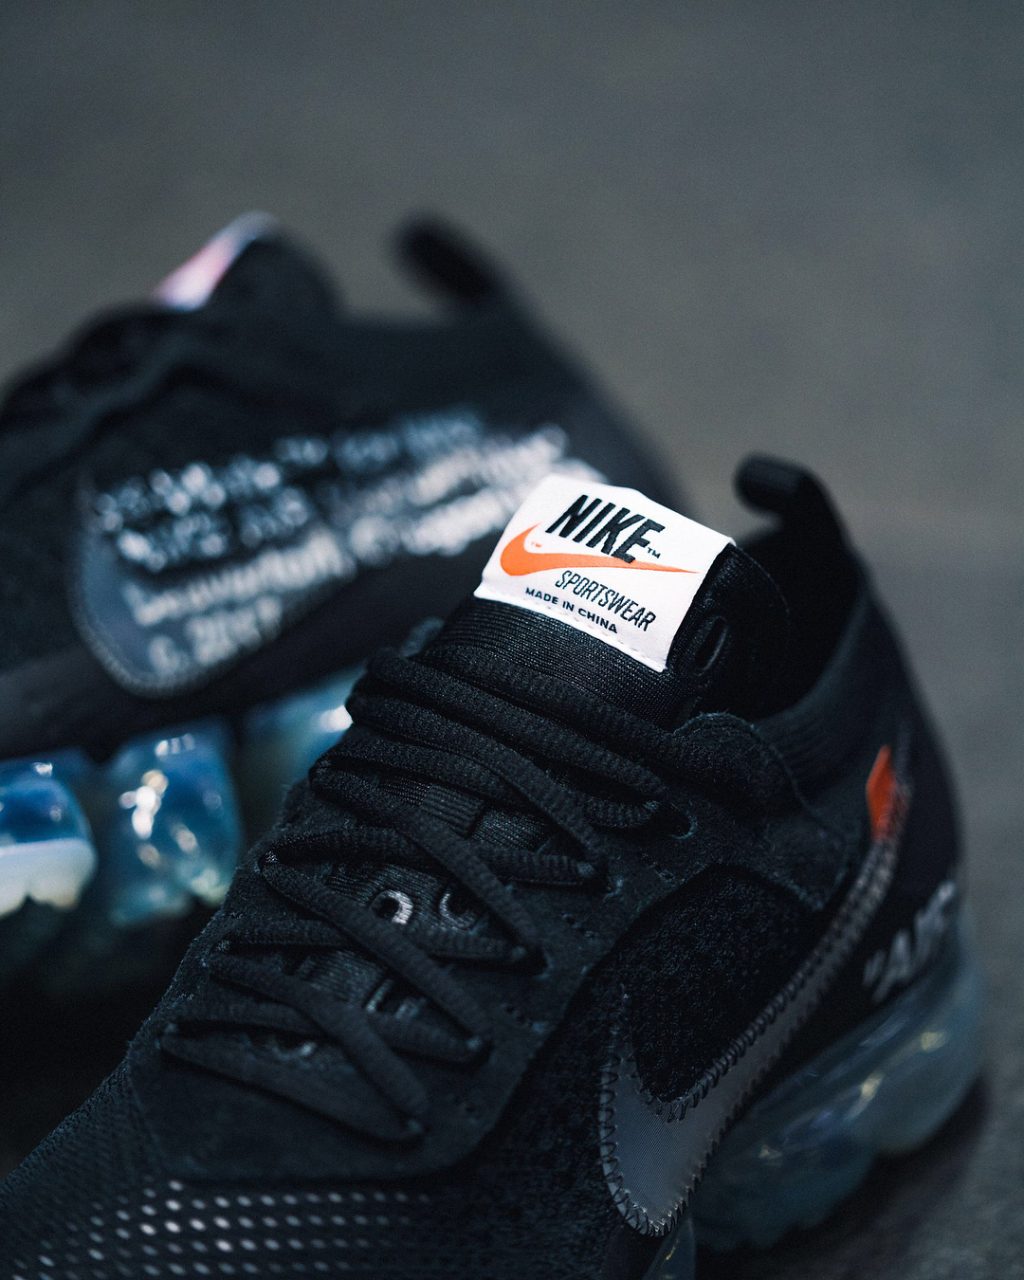 off-white-nike-air-vapormax-aa3831-002-release-20180330